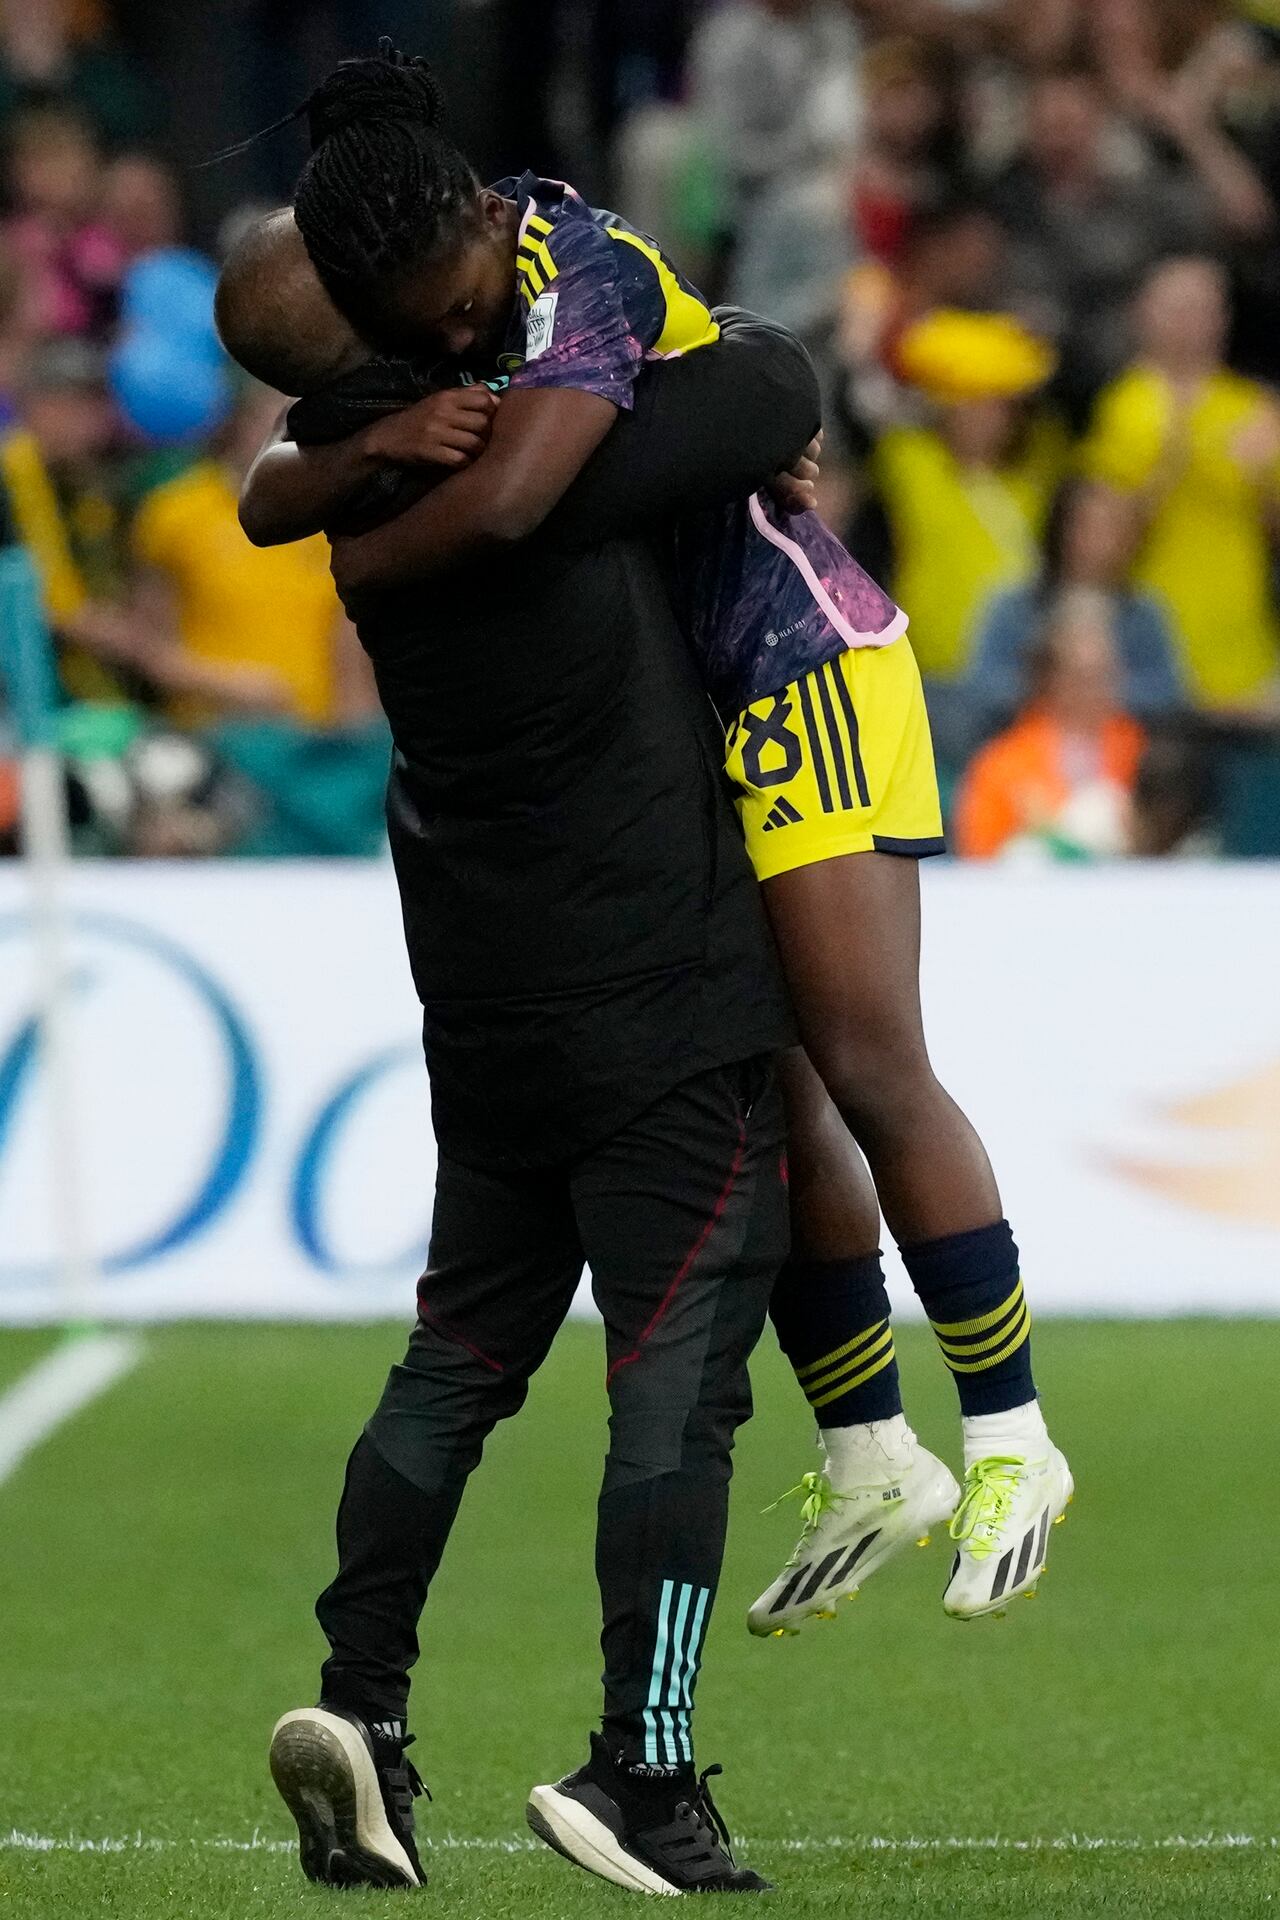 Colombia's Linda Caicedo celebrates with Colombia's head coach Nelson Abadia after scoring the opening goal during the Women's World Cup Group H soccer match between Germany and Colombia at the Sydney Football Stadium in Sydney, Australia, Sunday, July 30, 2023. (AP Photo/Mark Baker)